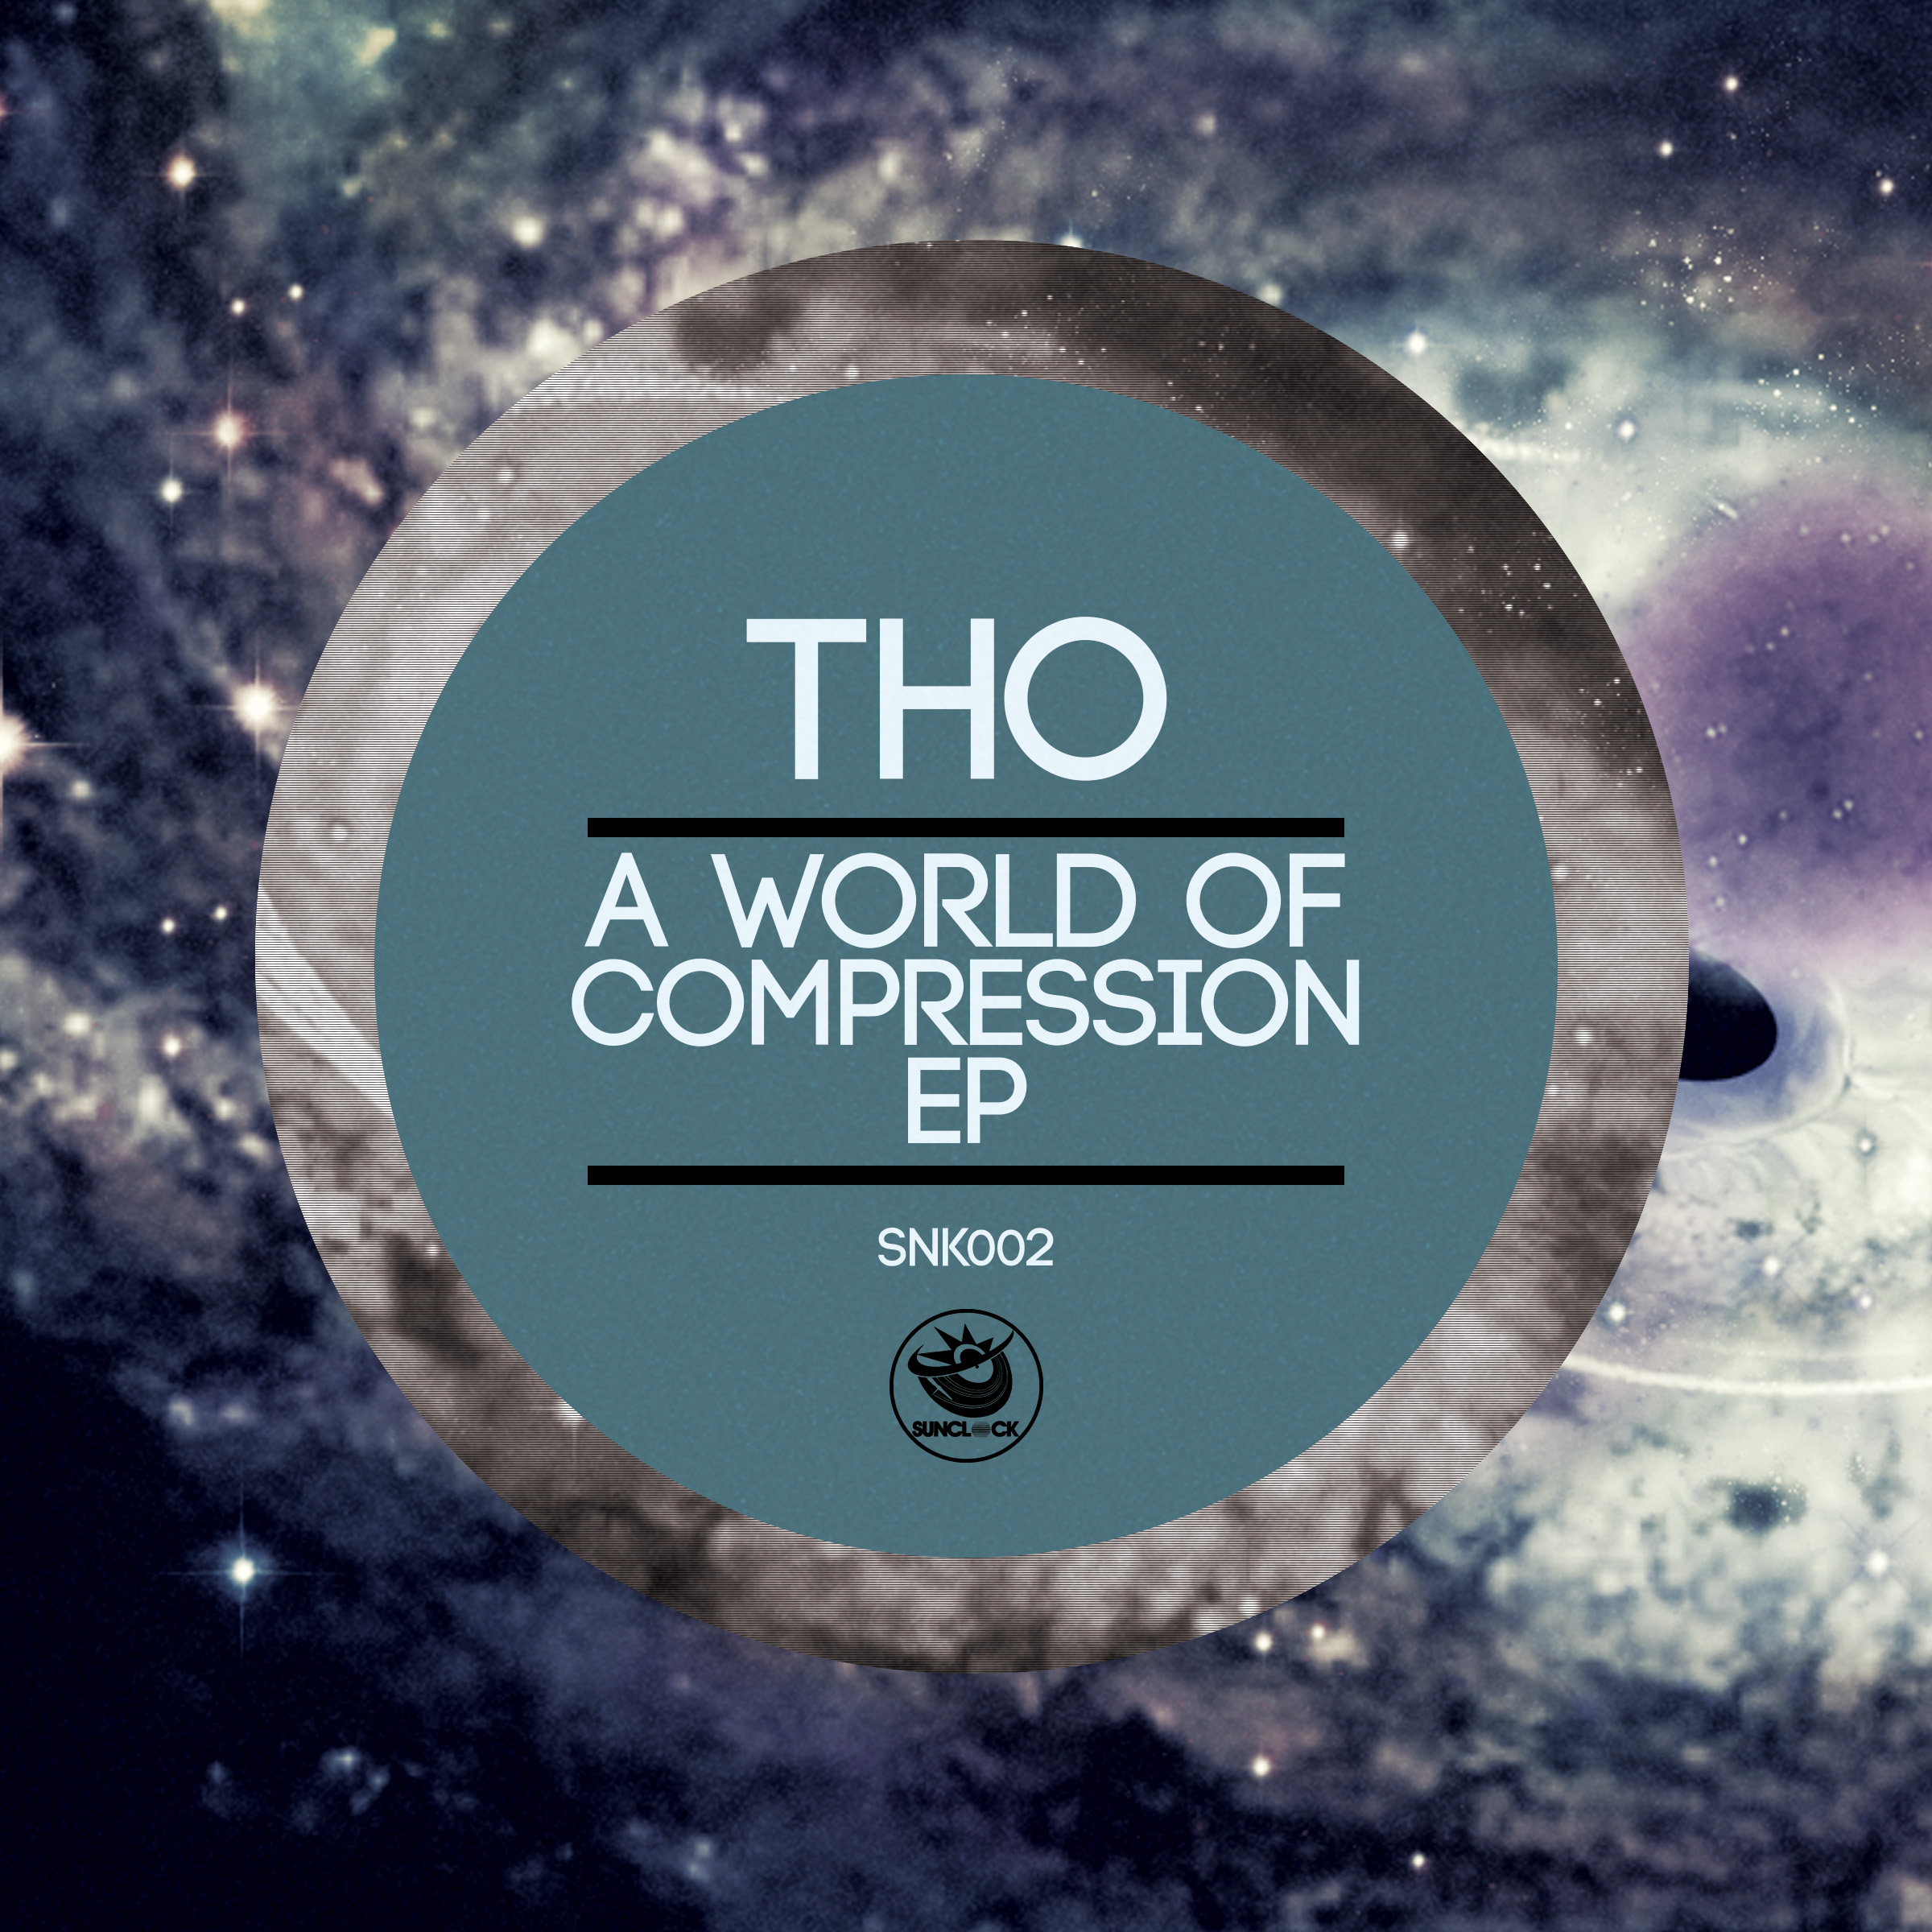 Tho - A World Of Compression Ep - SNK002 Cover